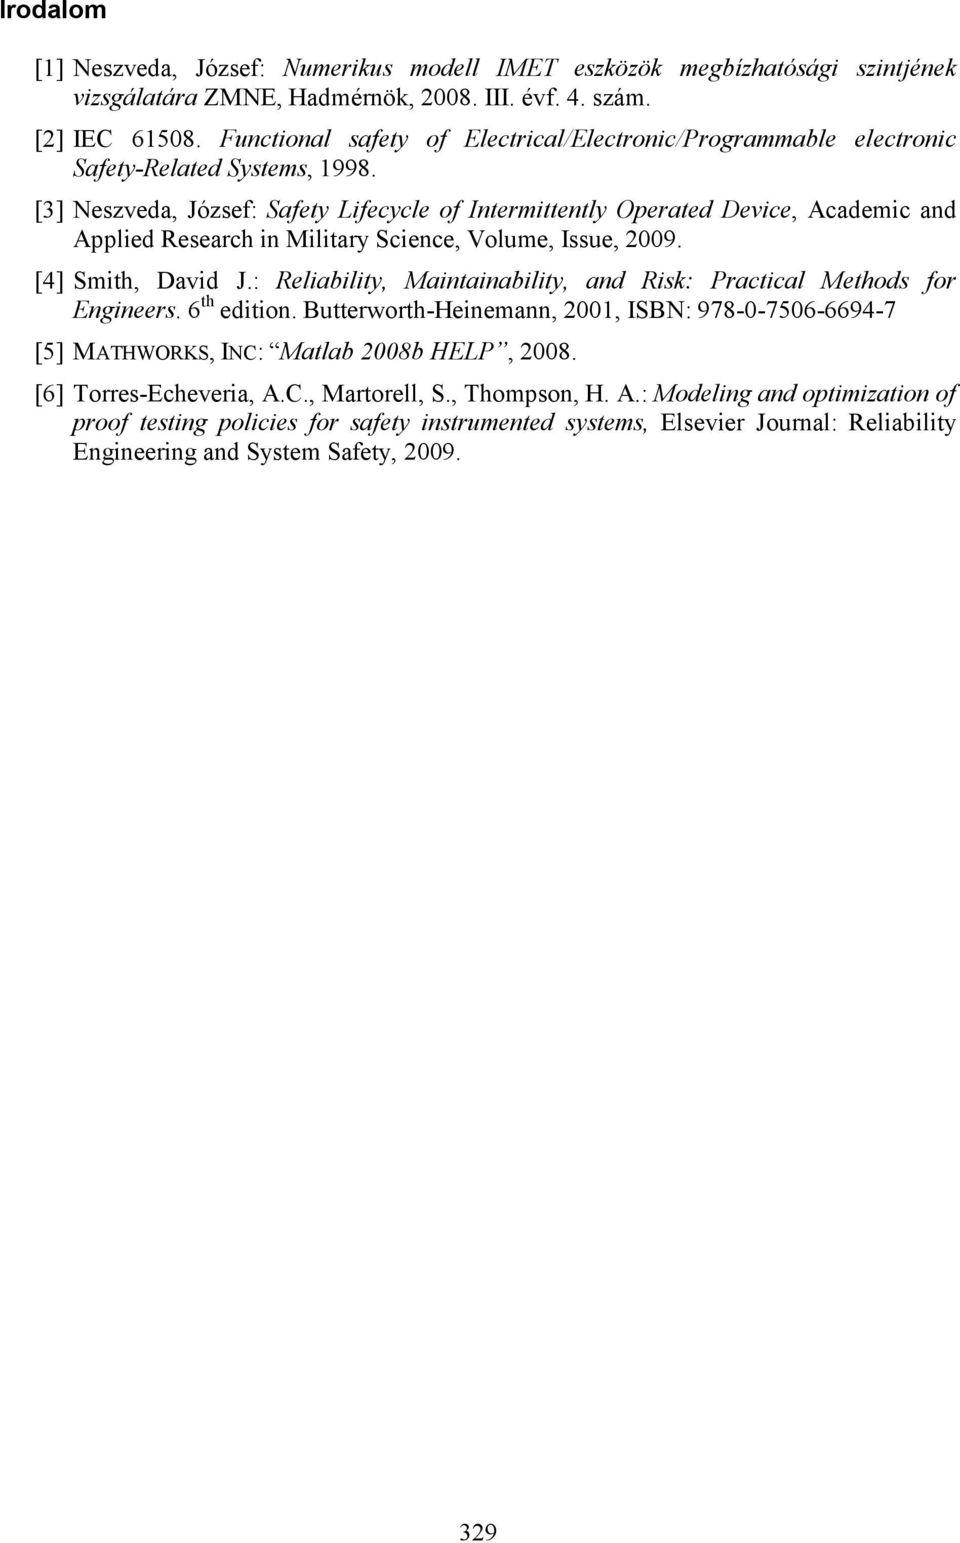 [3] Neszveda, József: afety Lifecycle of Intermittently Operated Device, Academic and Applied Research in Military cience, Volume, Issue, 009. [4] mith, David J.